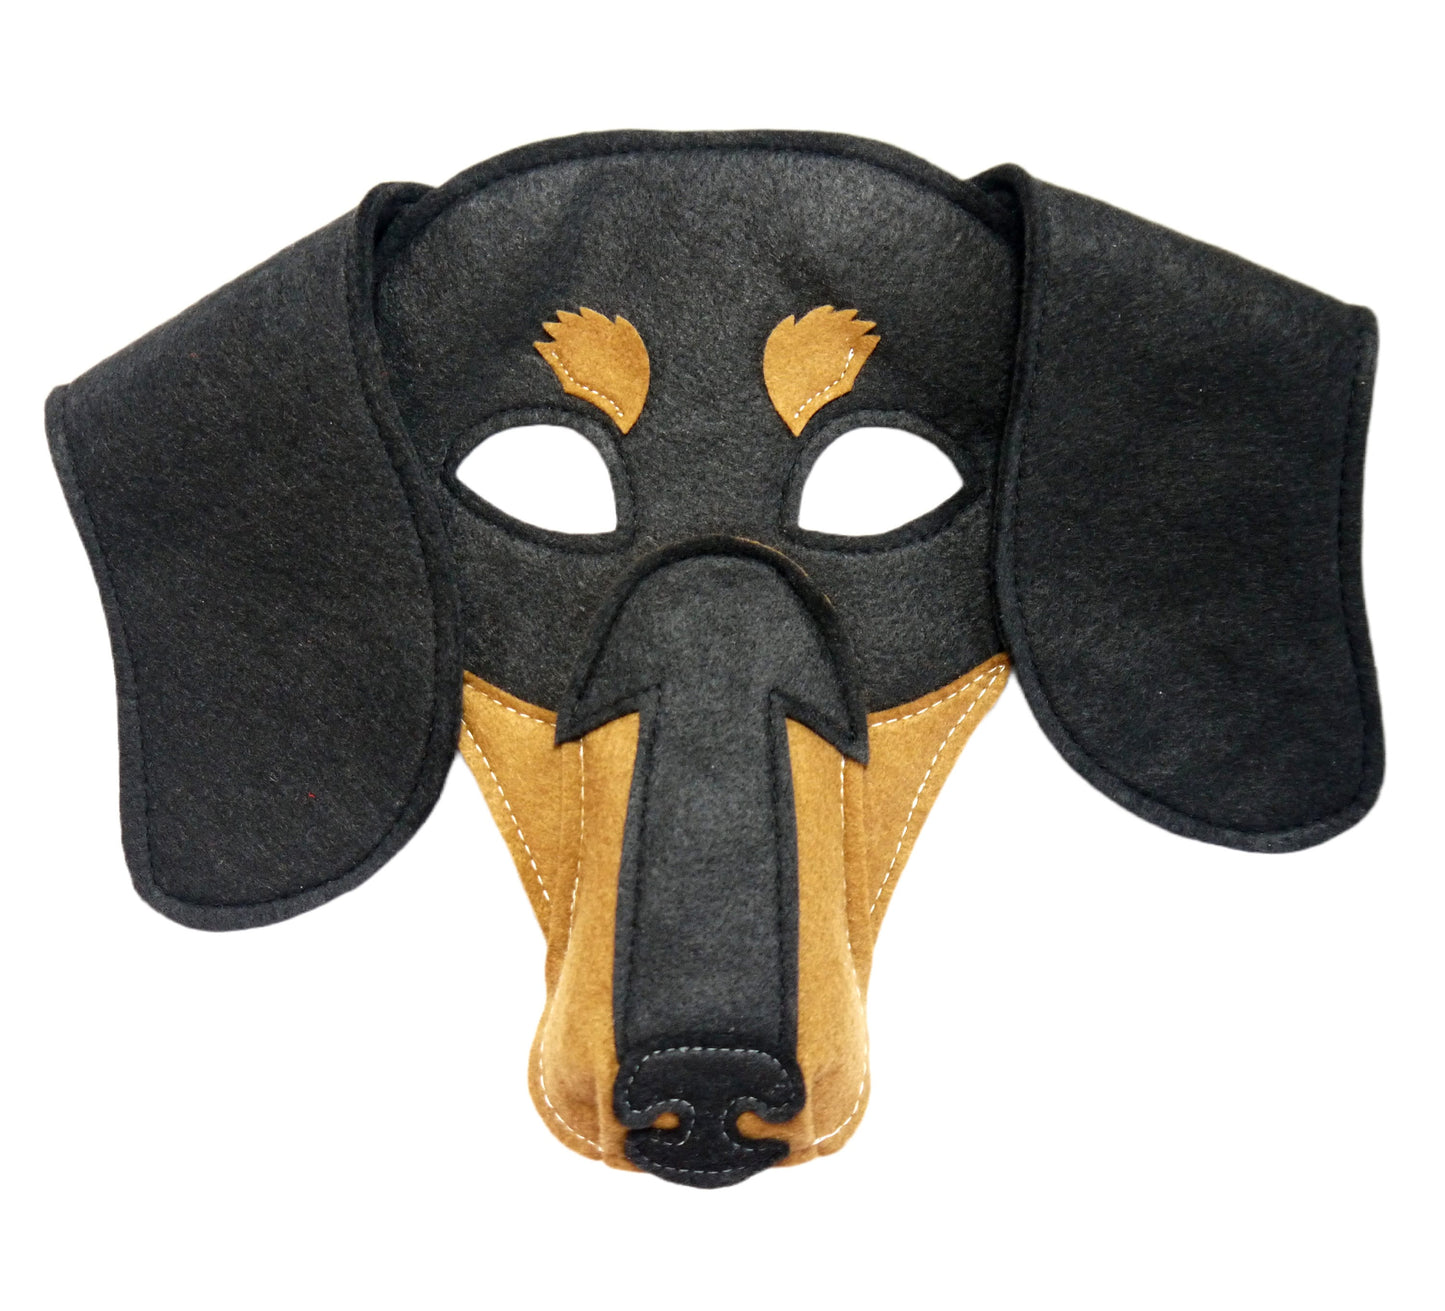 Dachshund Mask and paws costume, Father's day gift, Sausage Dog, gift, play production Theatre, dog lover gift, Adult and children’s sizes